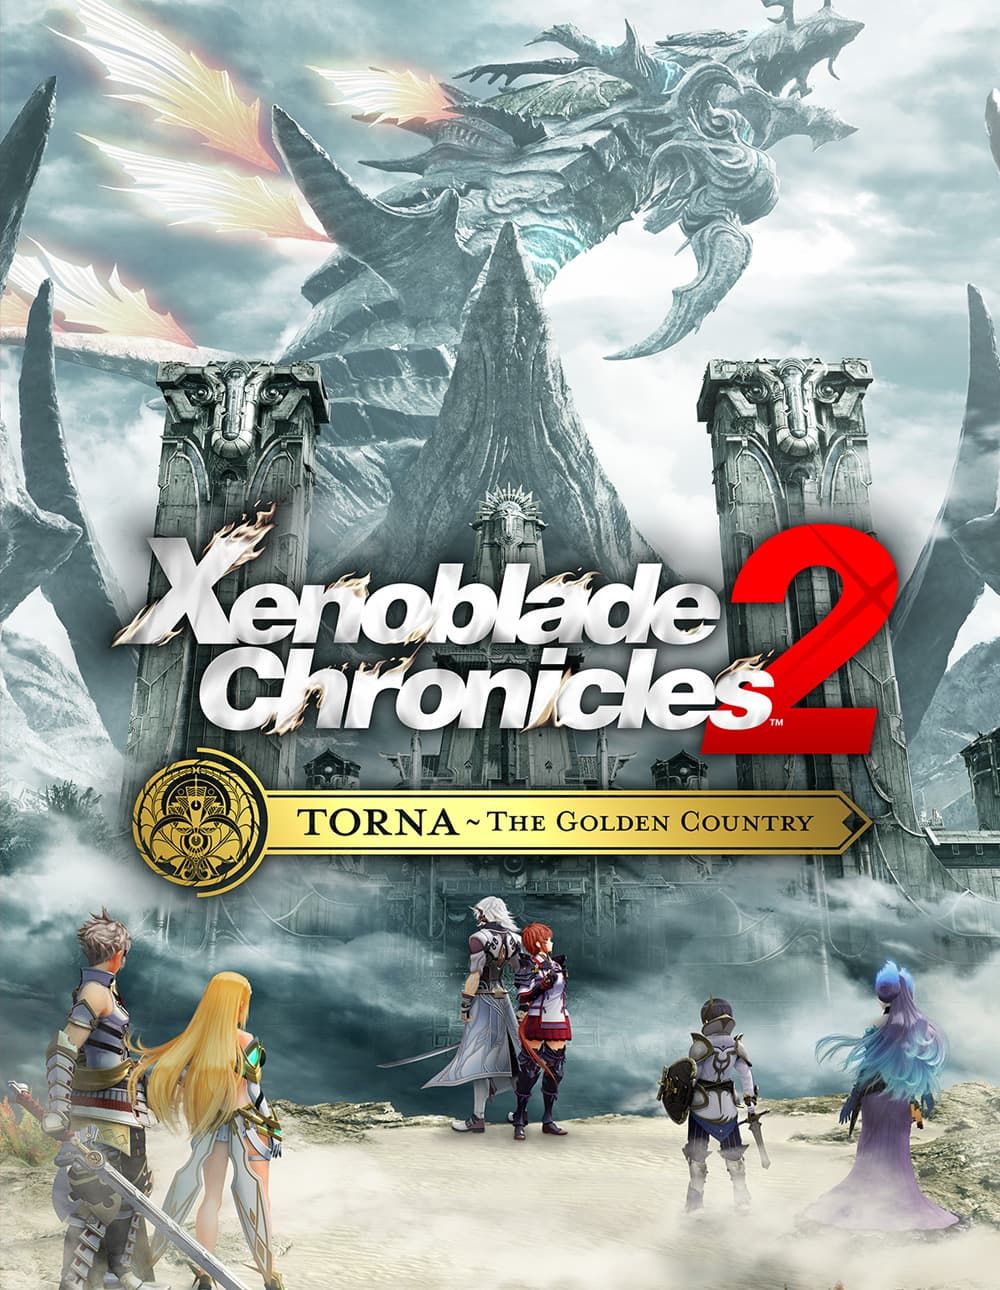 download xenoblade chronicles torna the golden country for free